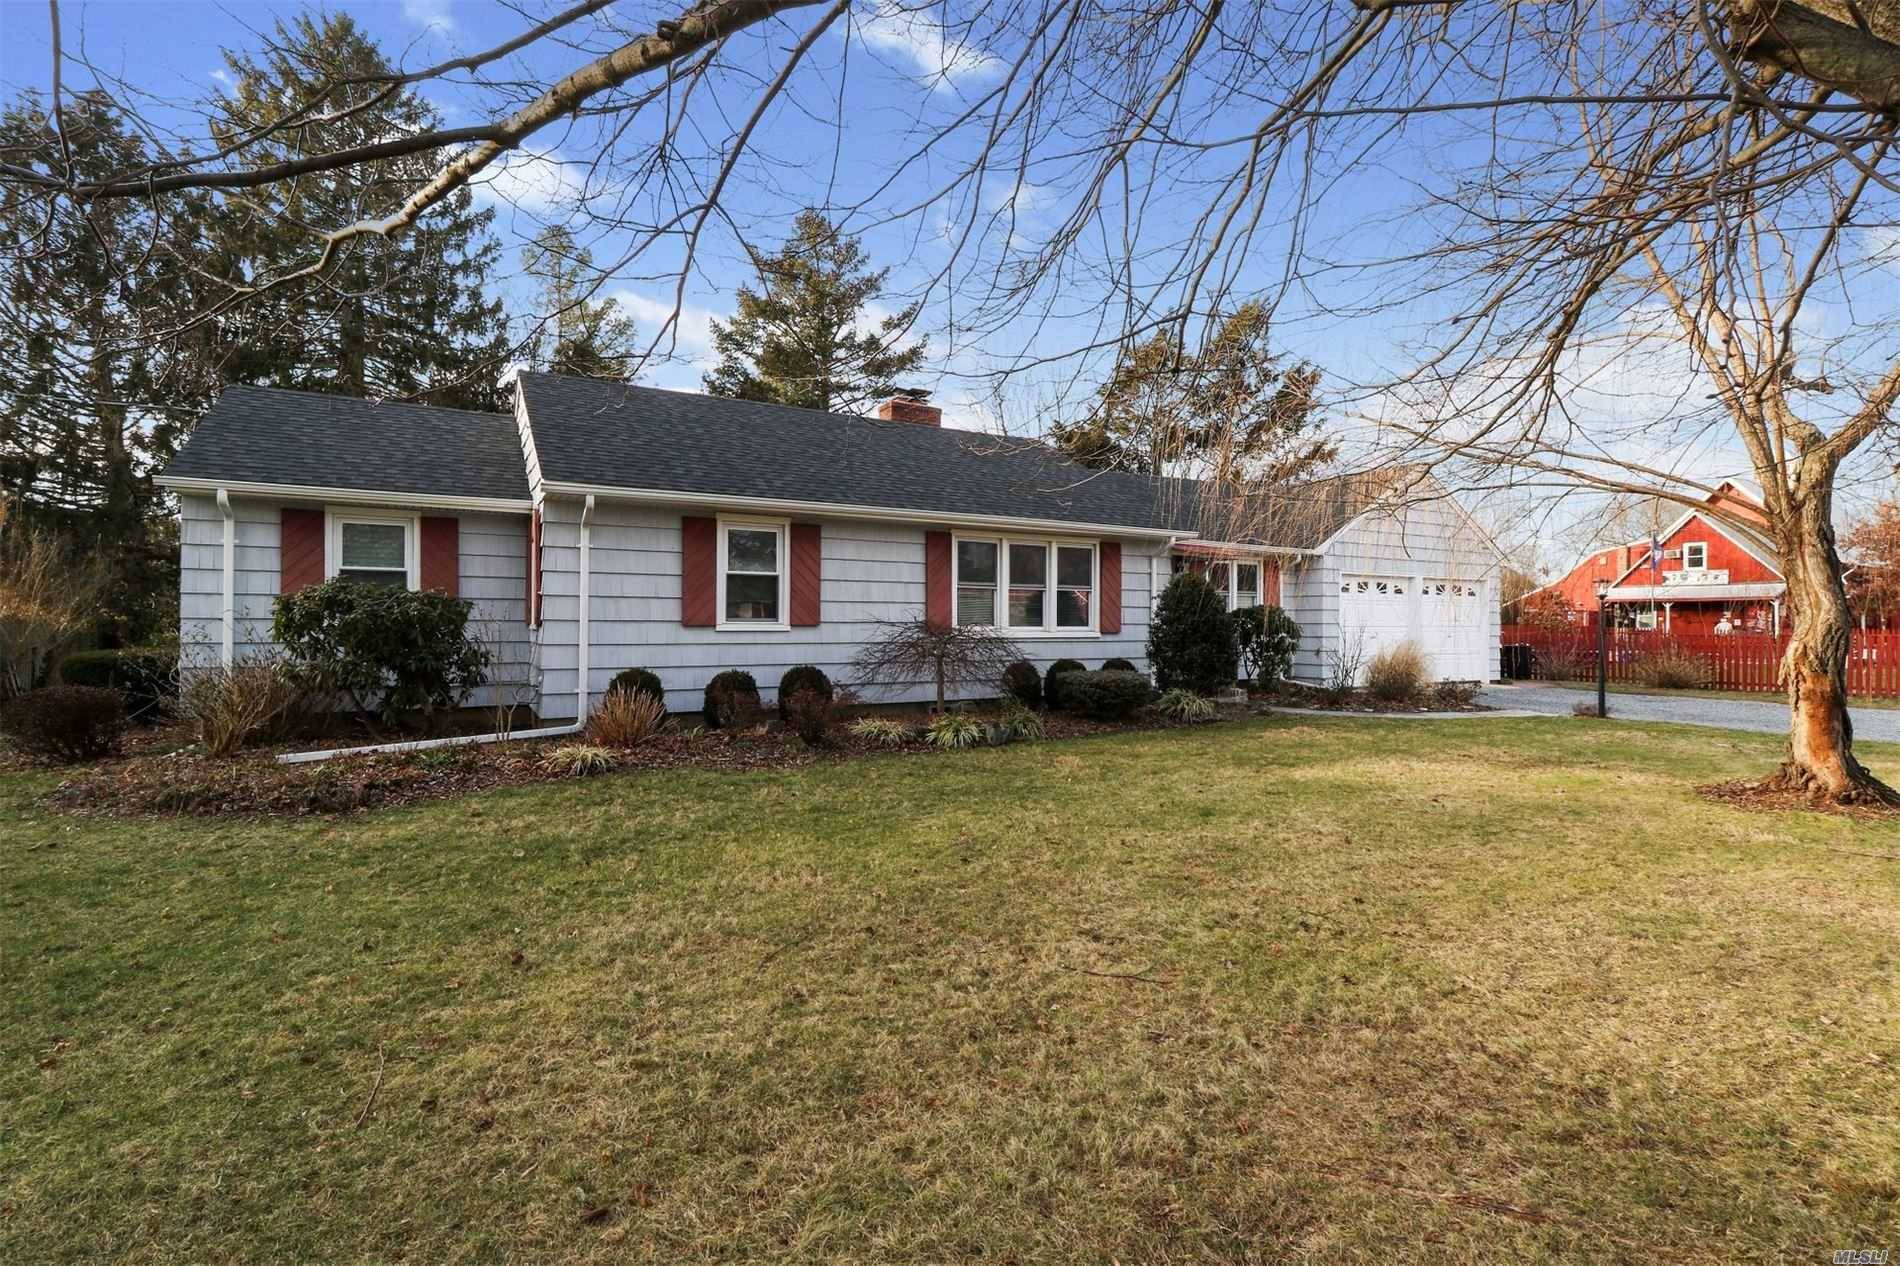 Lovingly Maintained Village 2 Br Ranch W Enclosed Heated Sun Room Overlooking Picturesque Backyard.